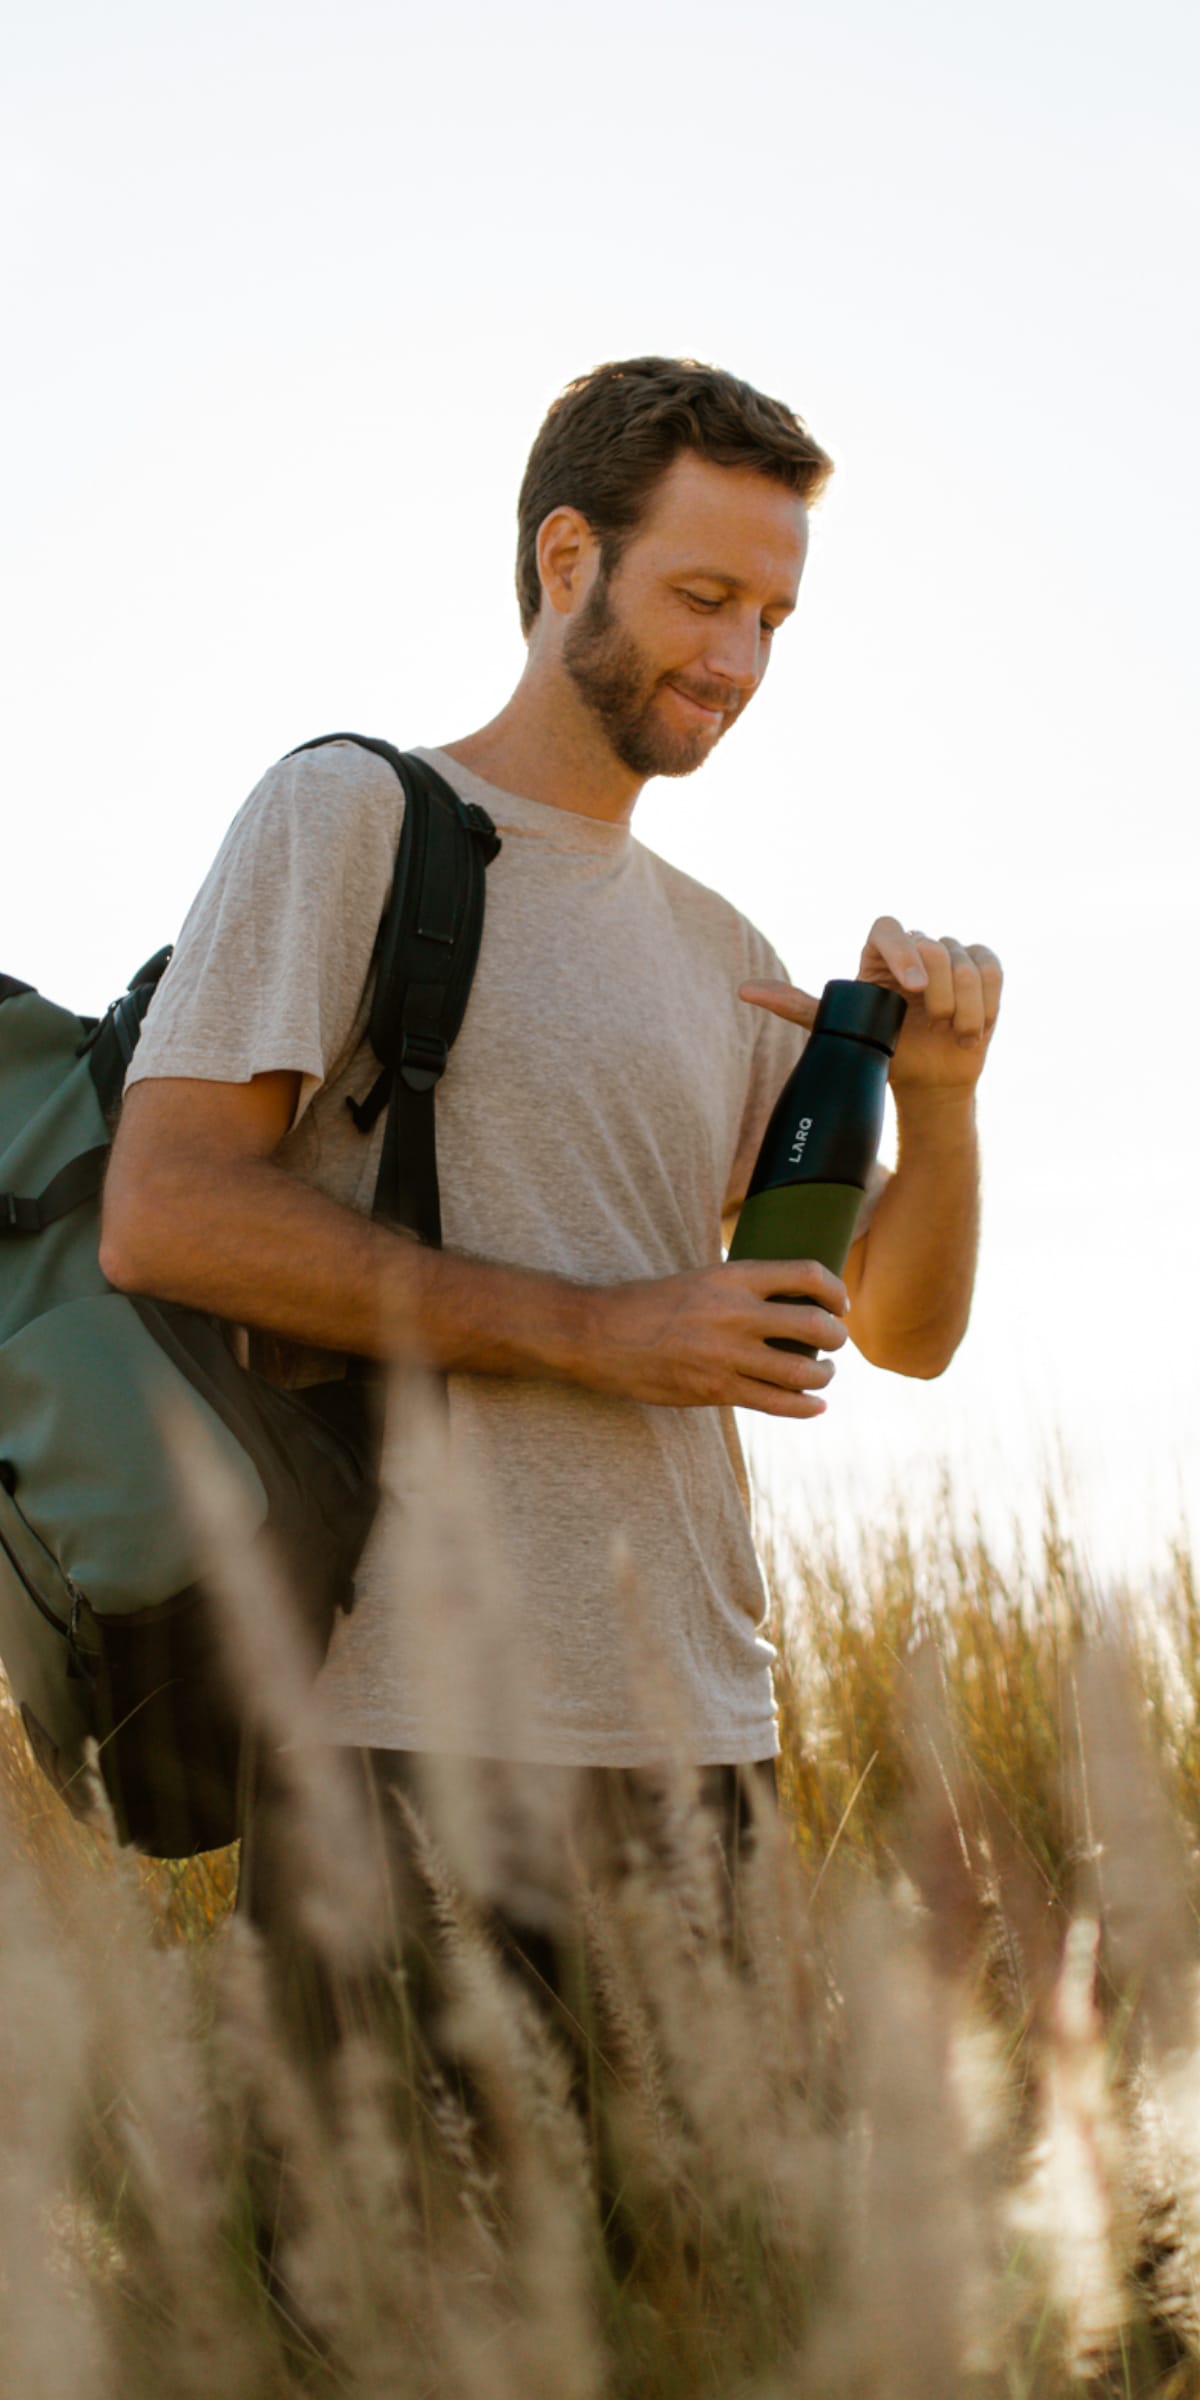 The LARQ Bottle Ensures Fresh Drinking Water At The Touch Of A Button